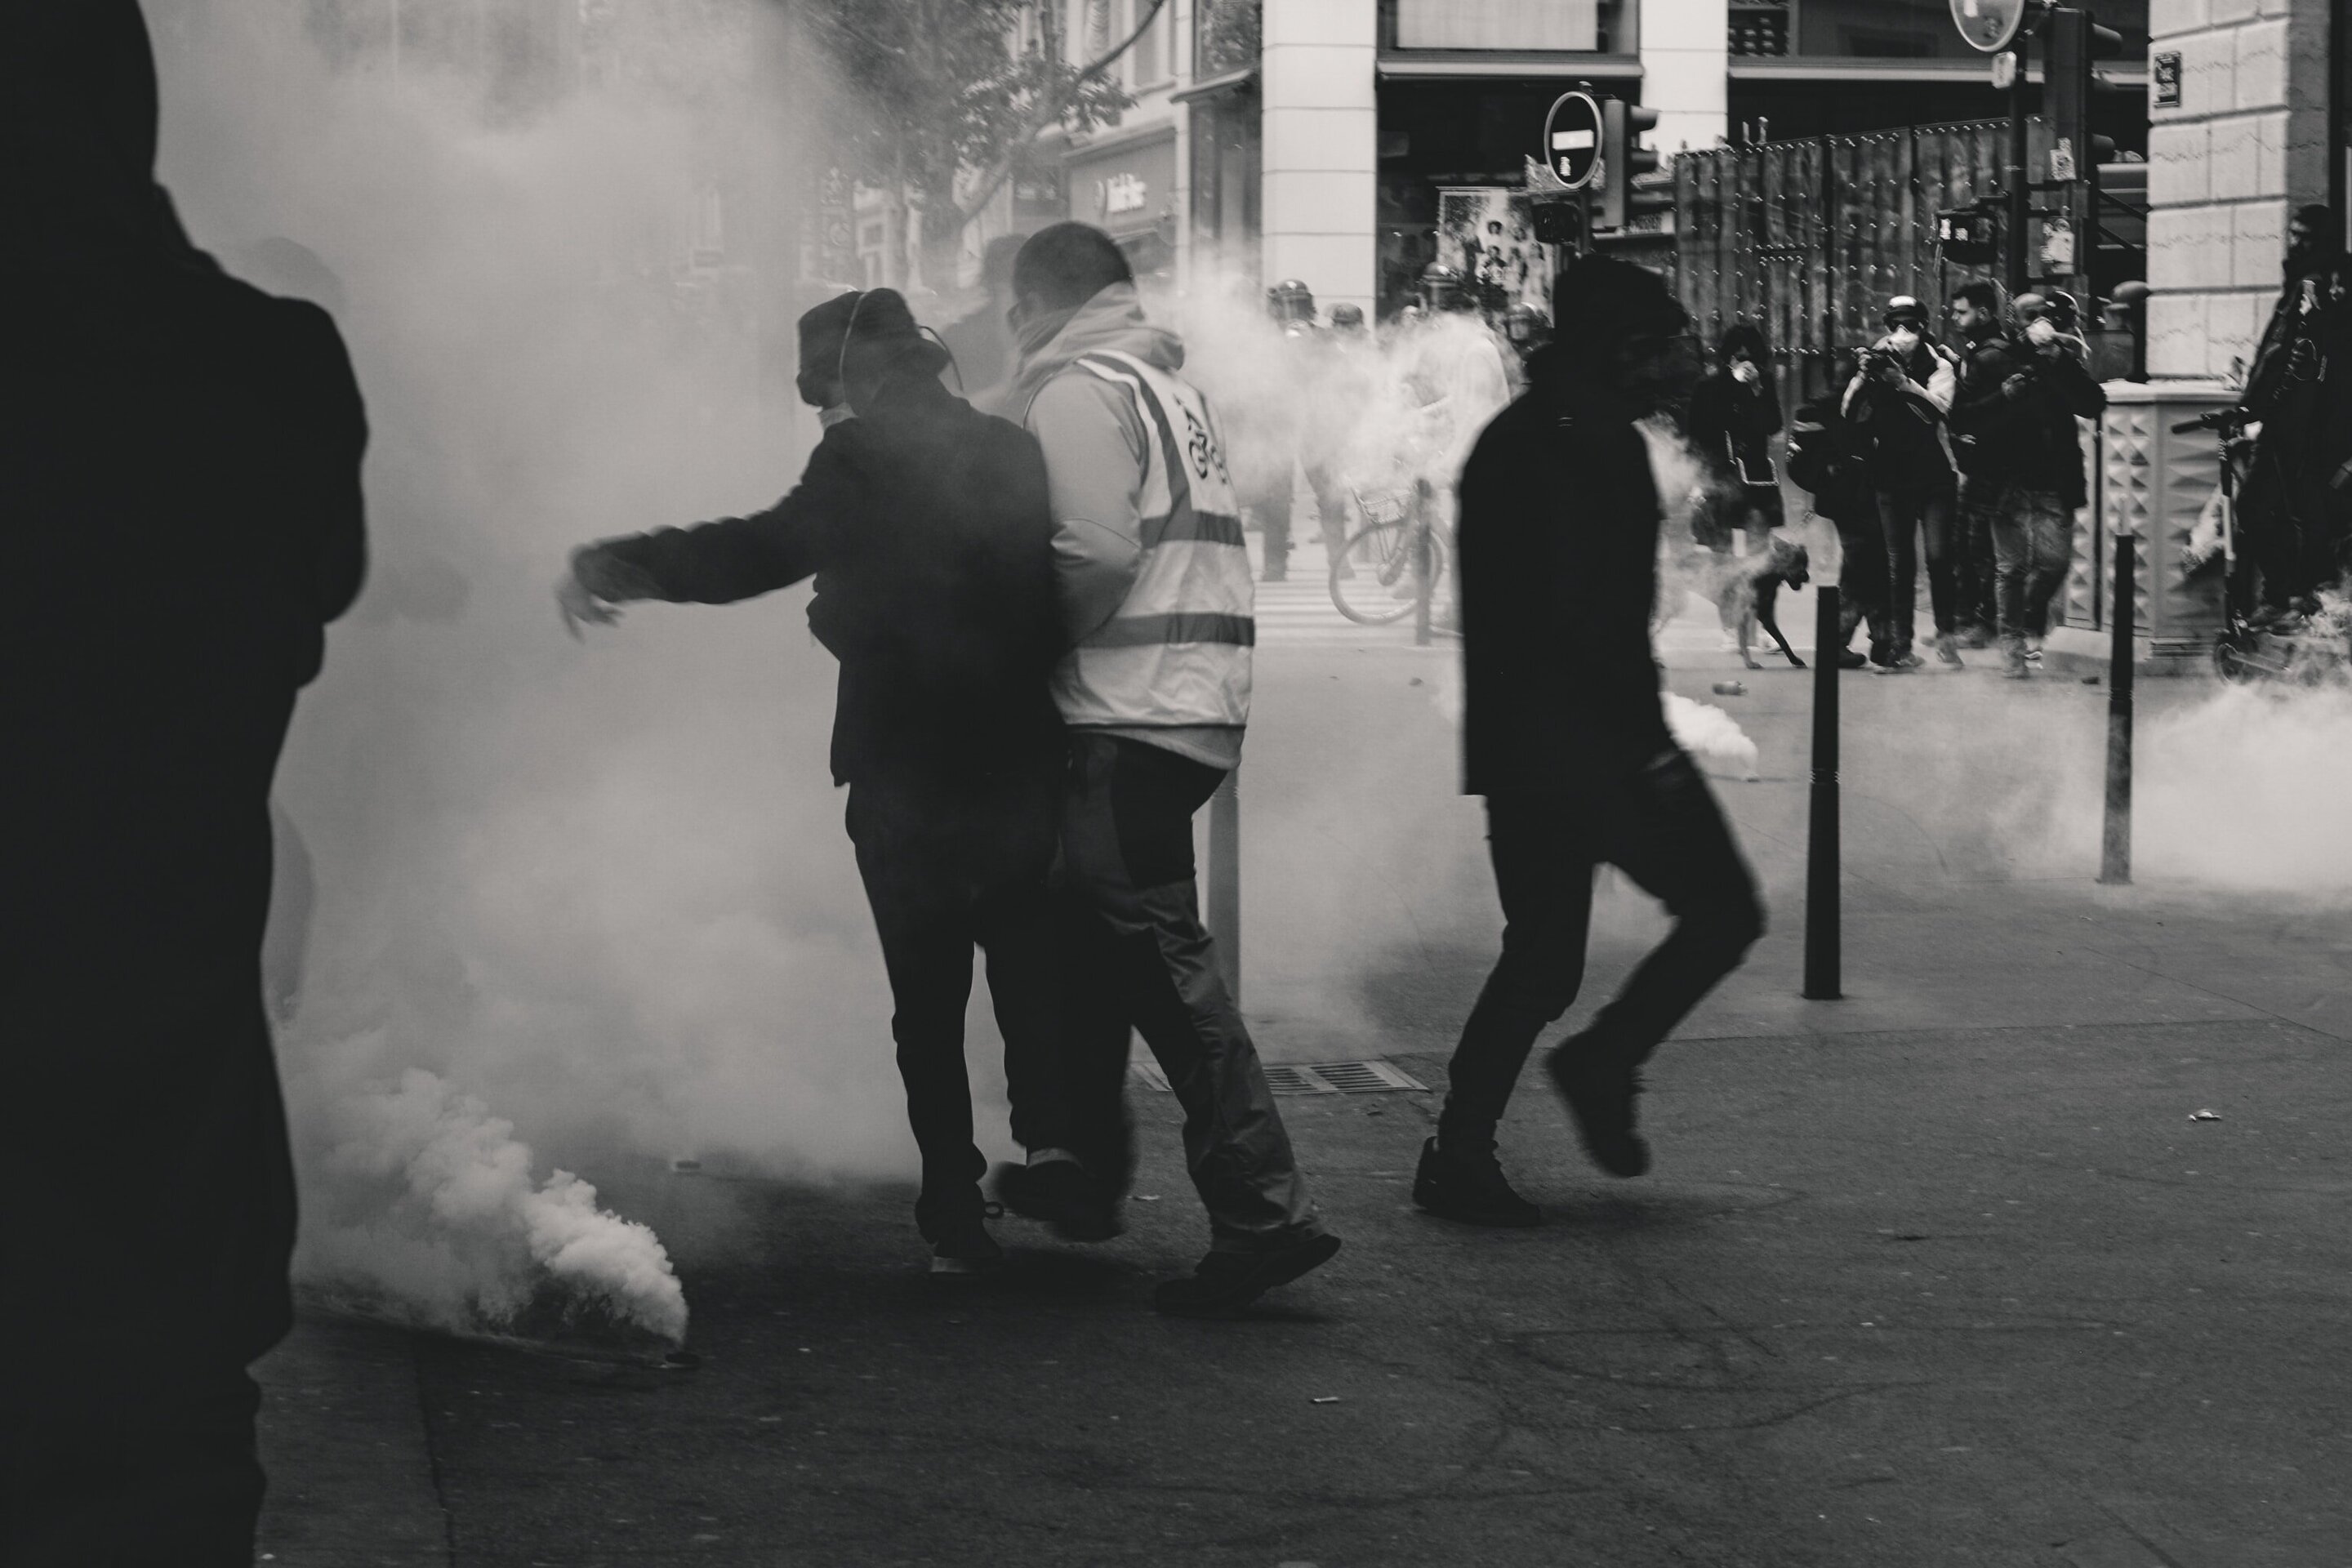 Study suggests link between tear gas exposures and adverse reproductive health outcomes